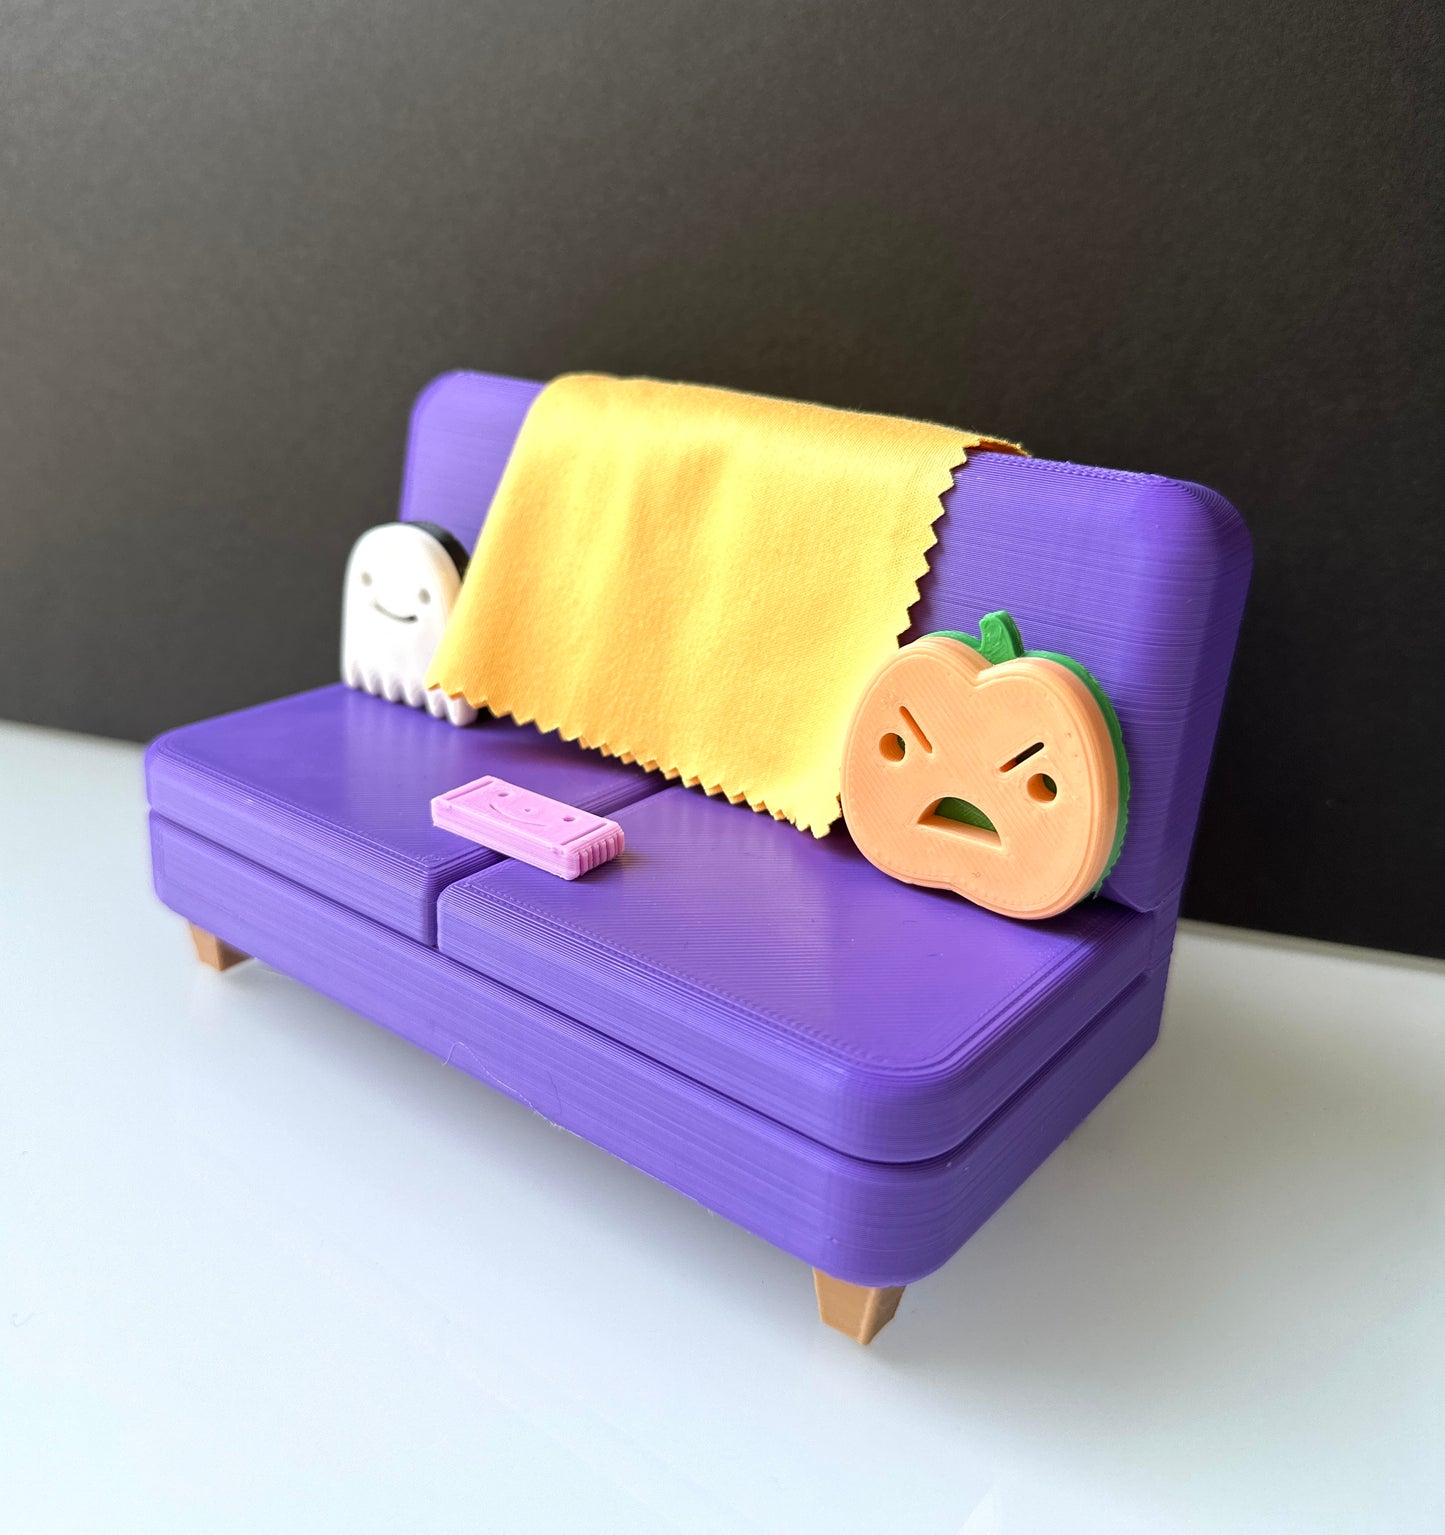 The Halloween Colab Couch Phone Holder with Candy Bar and Ghost + Pumpkin Pillows